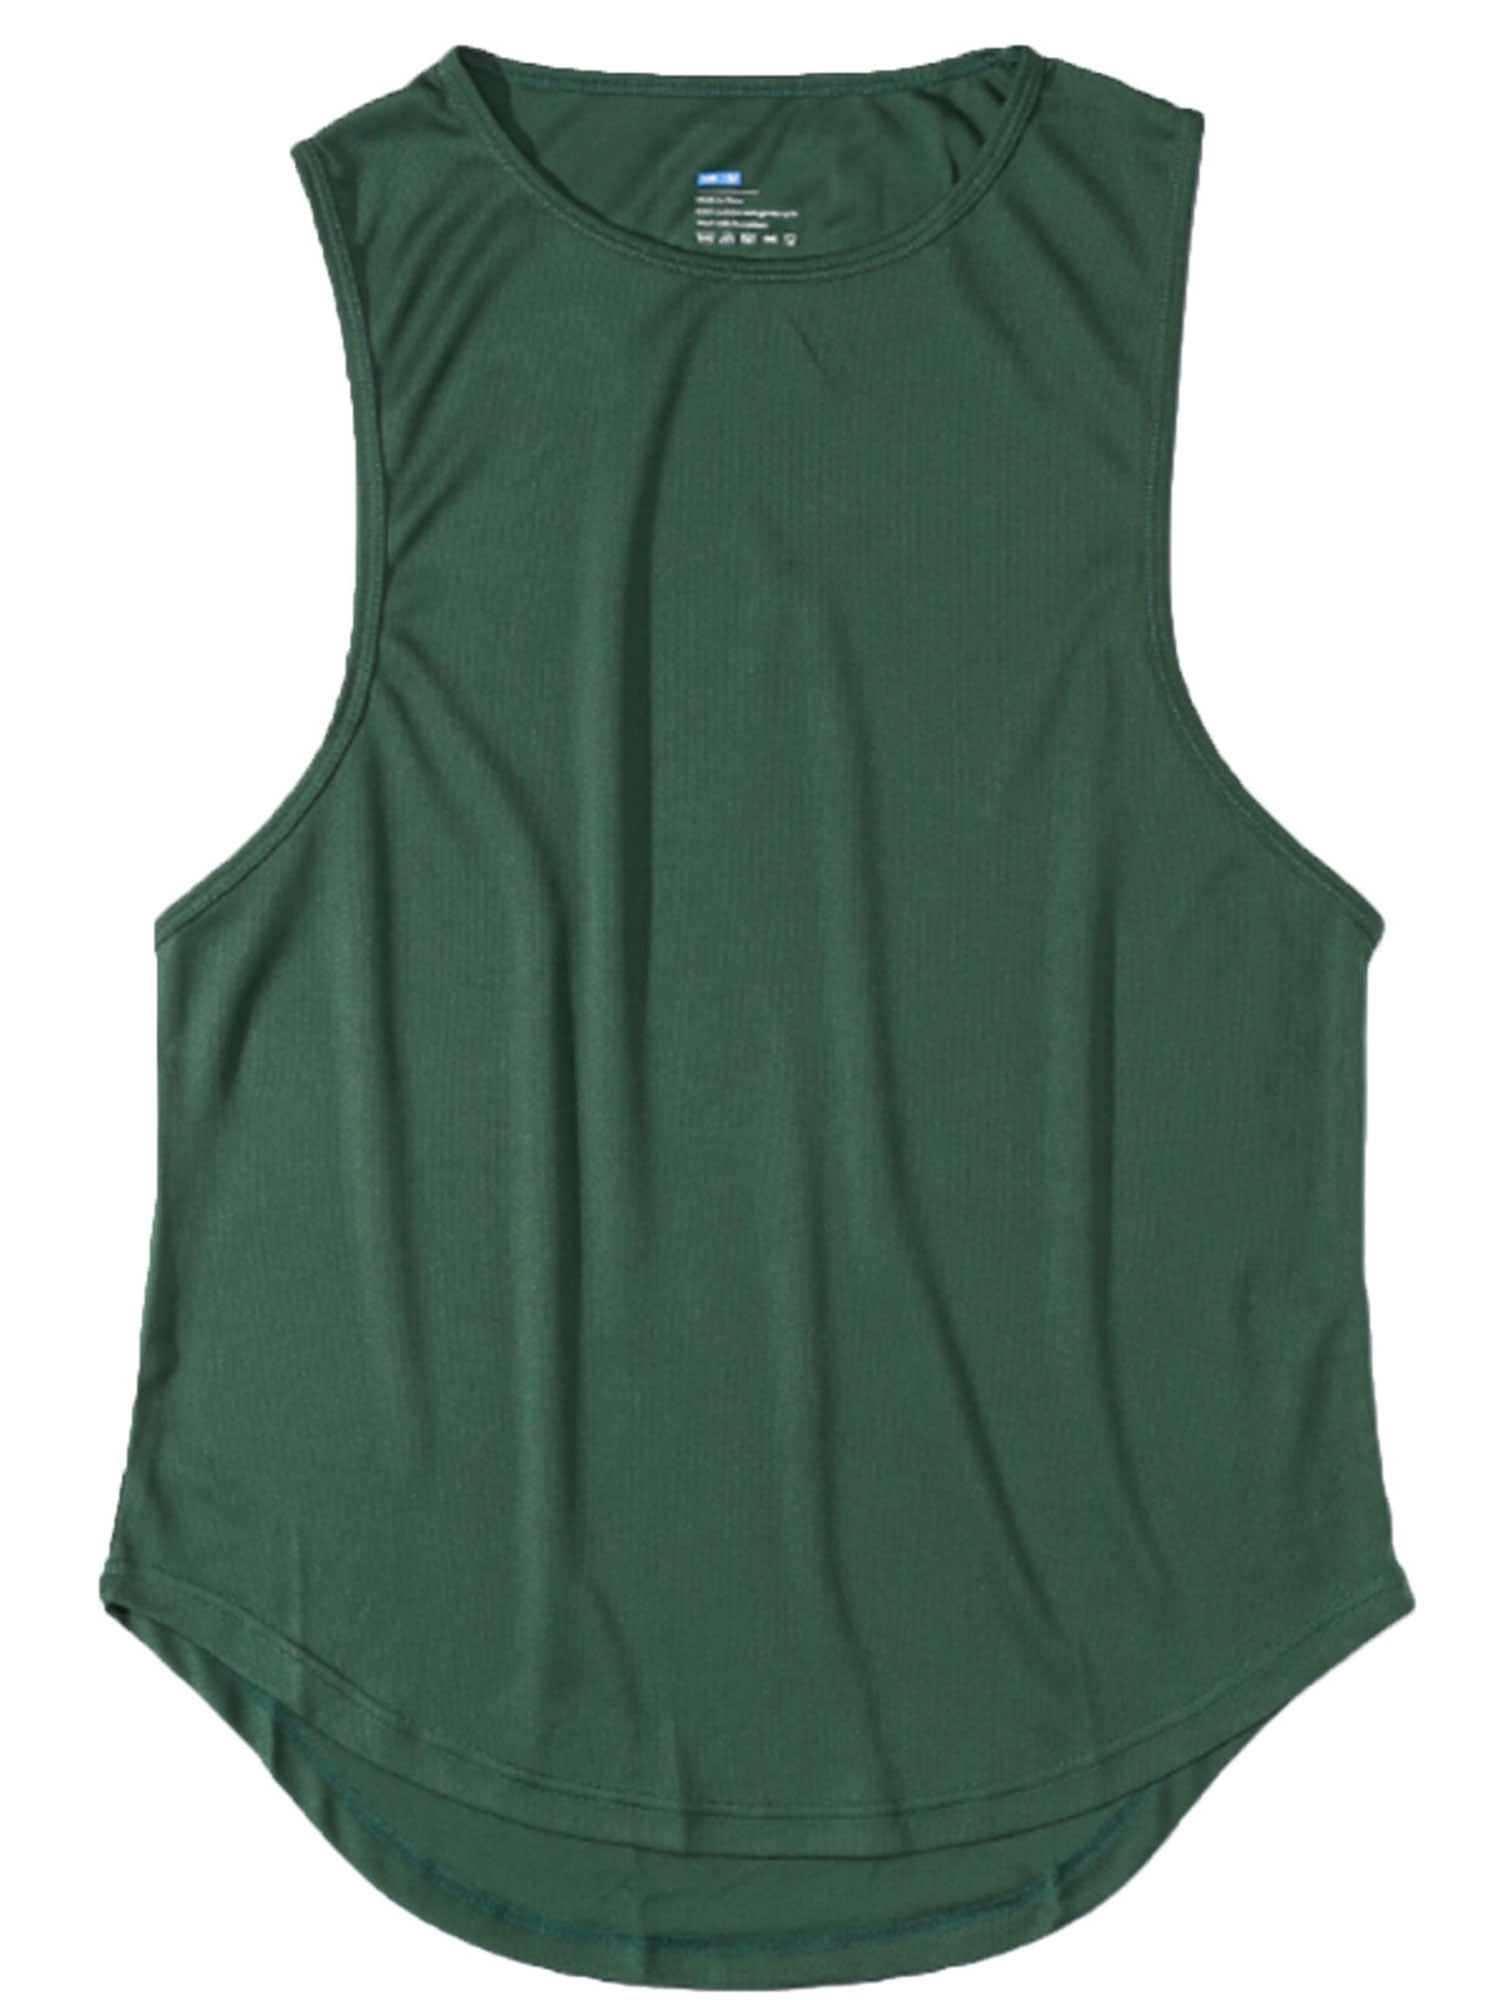 Diconna Men Sports Tank Top Summer Breathable Sleeveless Round Neck Solid Color  Tops Running Fitness Tops Green M 